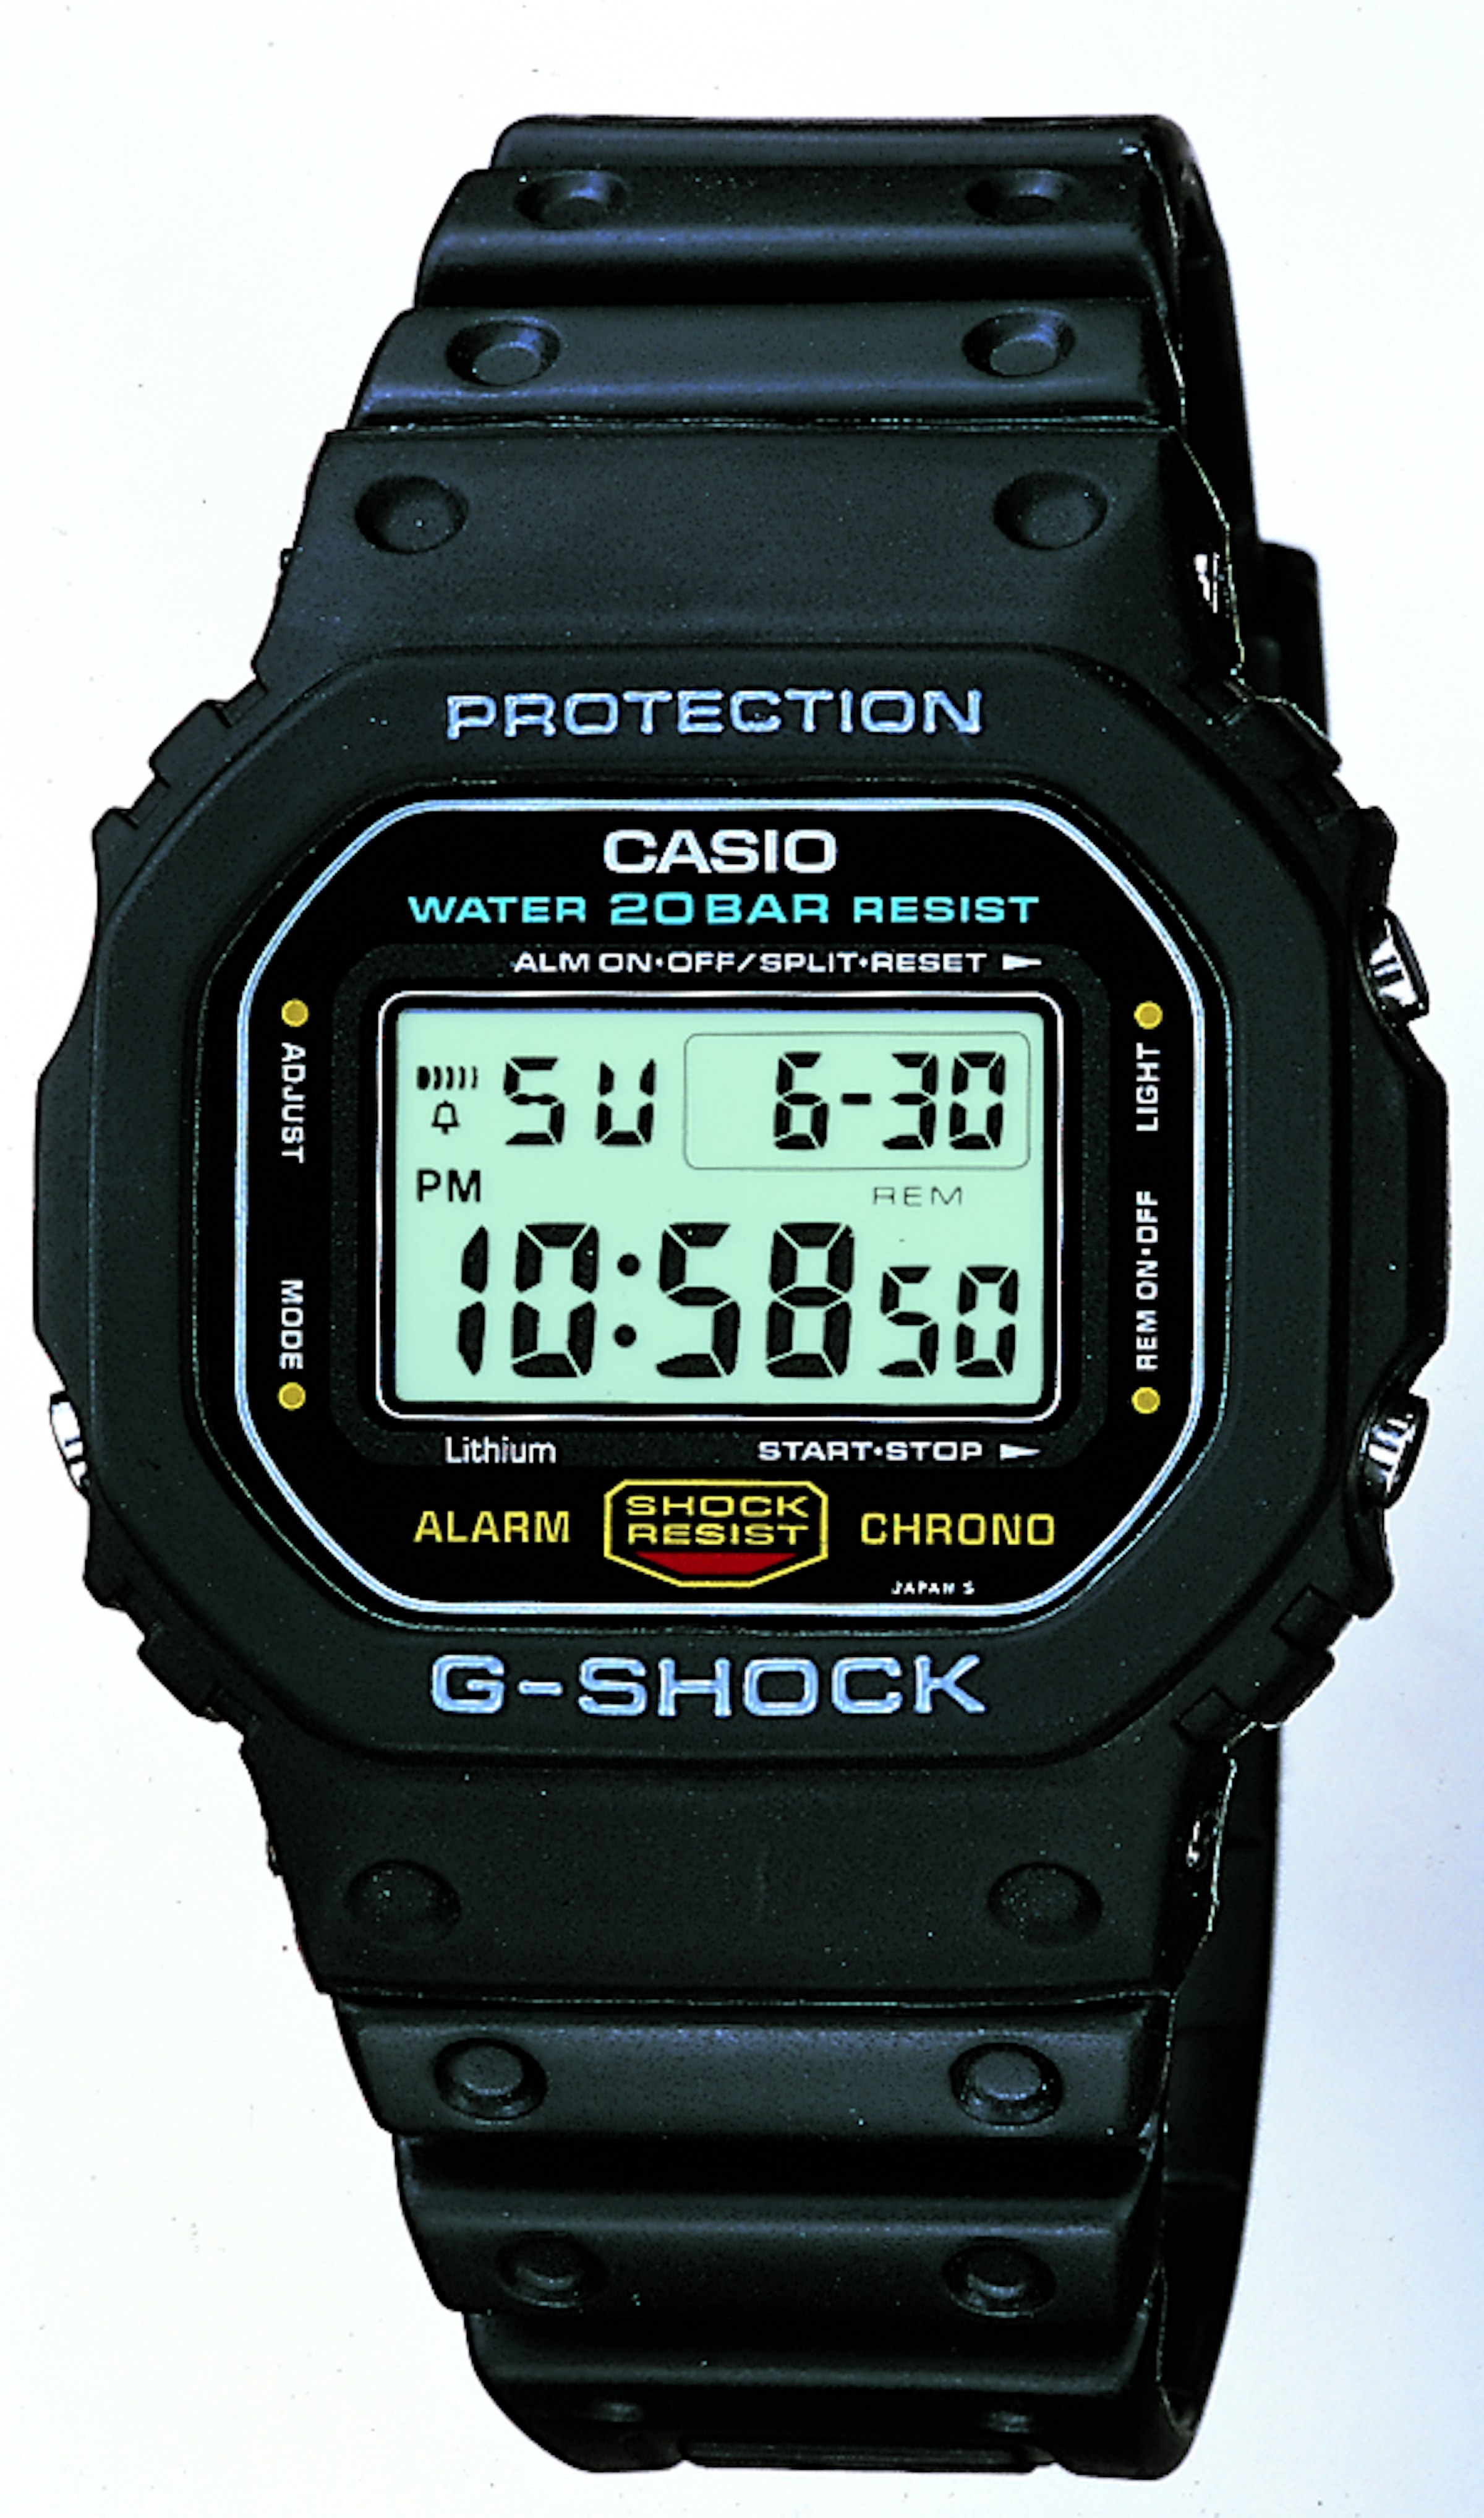 The classic square type of G-SHOCK, DW-5600C. It's a basic model of the 5600 series that inherited the DNA of the first generation DW-5000C